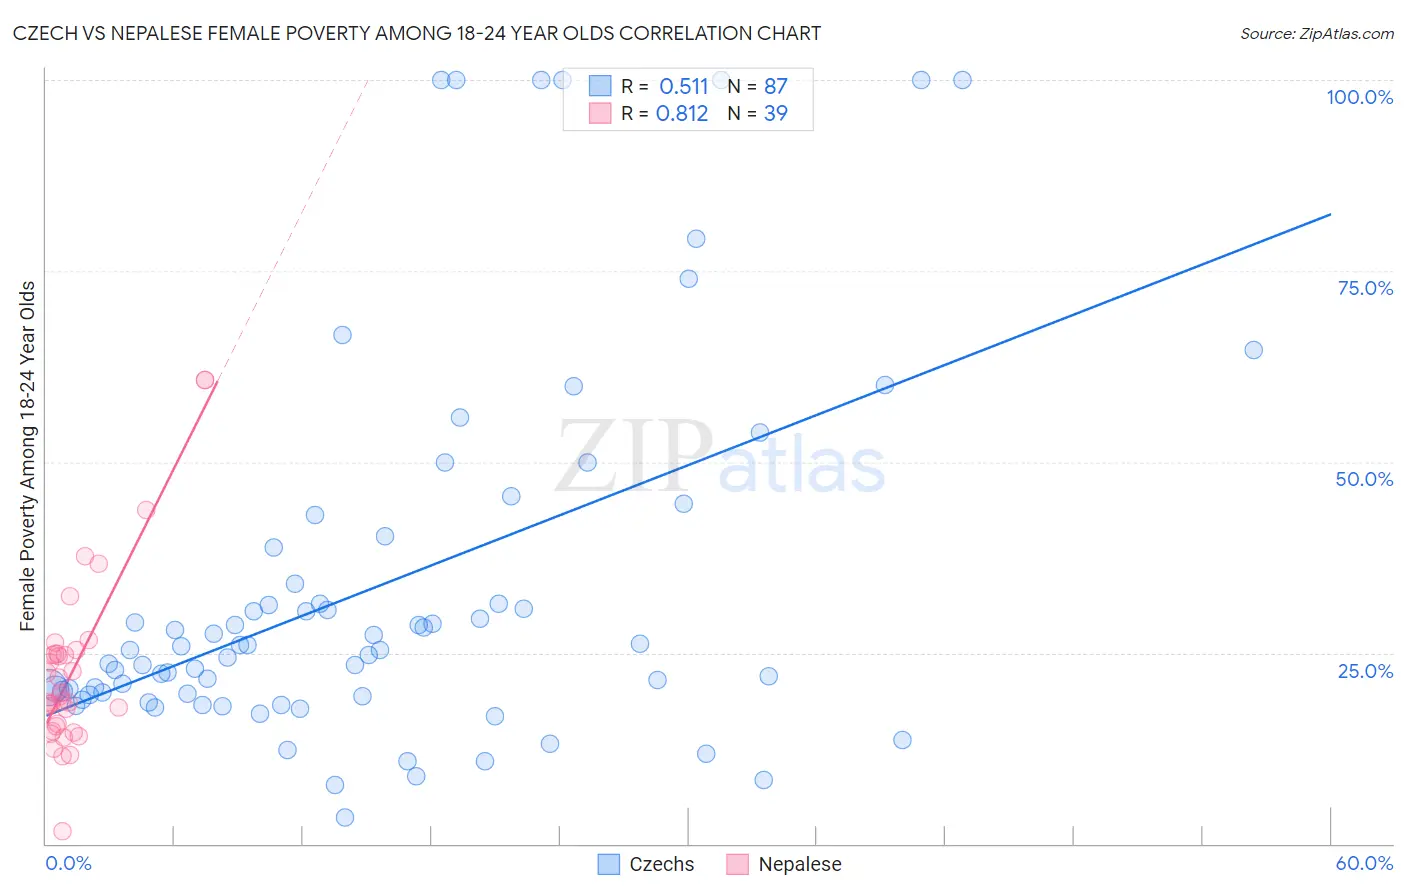 Czech vs Nepalese Female Poverty Among 18-24 Year Olds